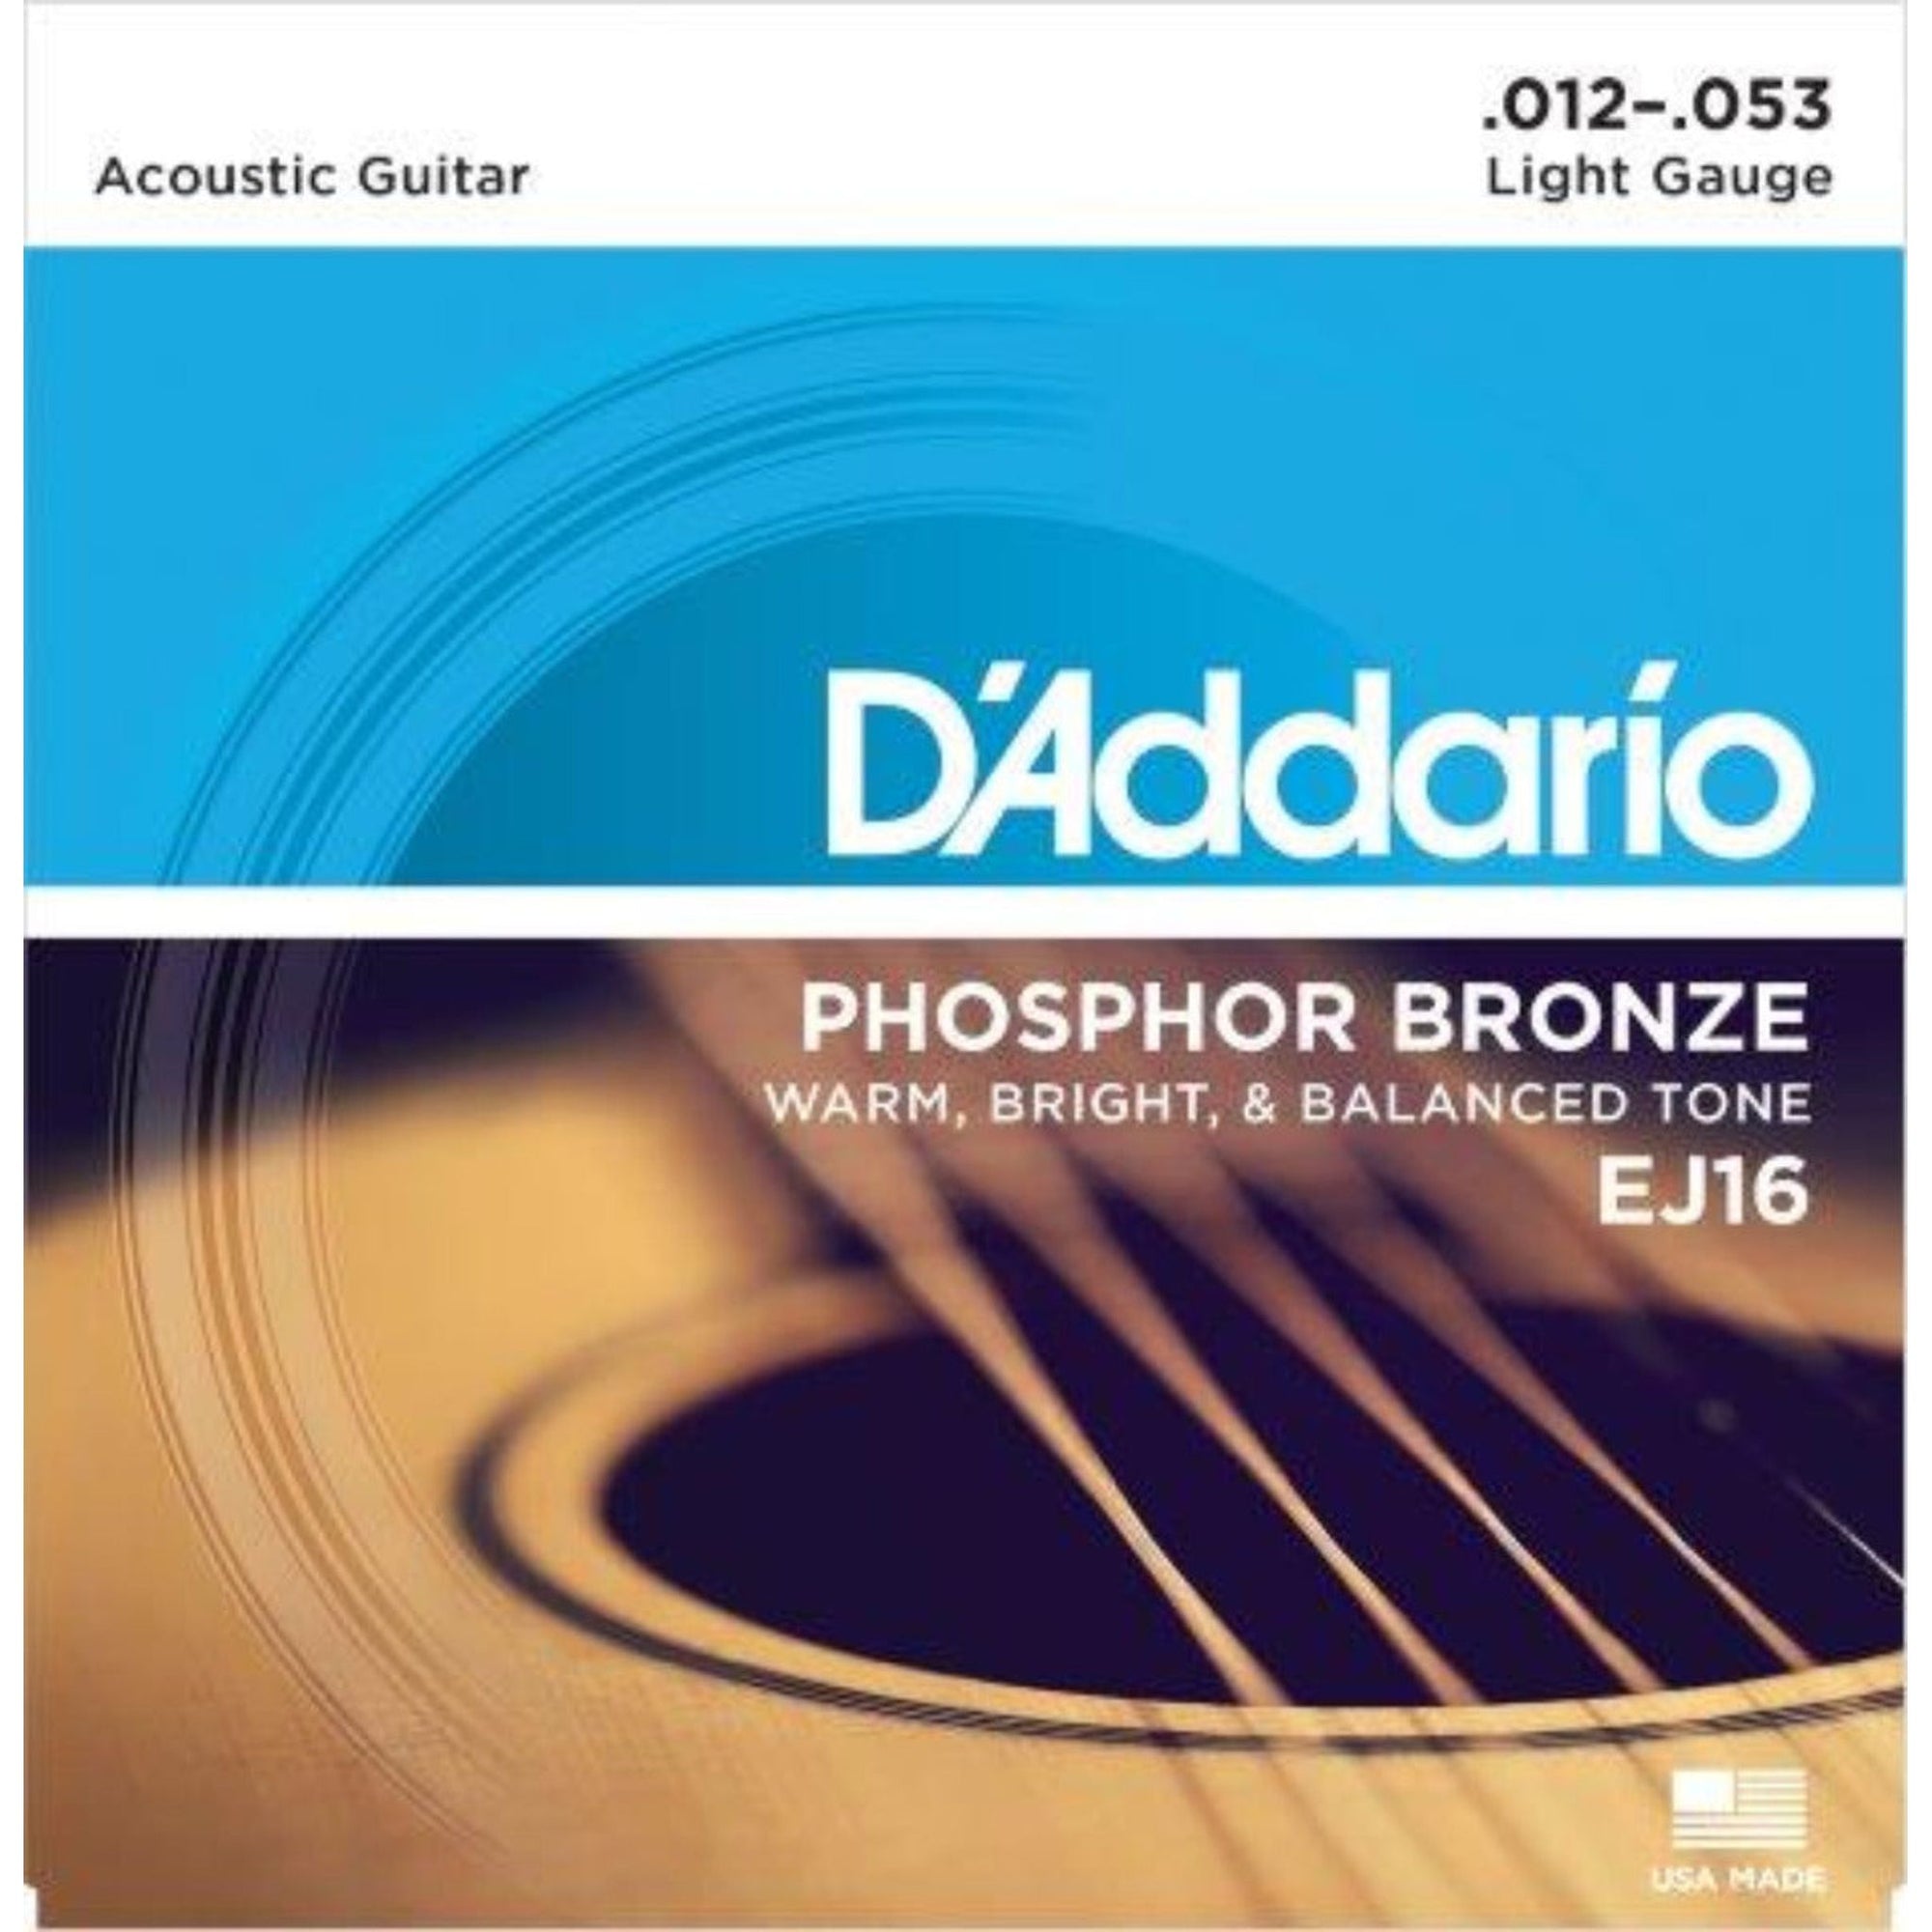 D'Addario's most popular acoustic set, EJ16 delivers the ideal balance of volume, projection and comfortable playability.